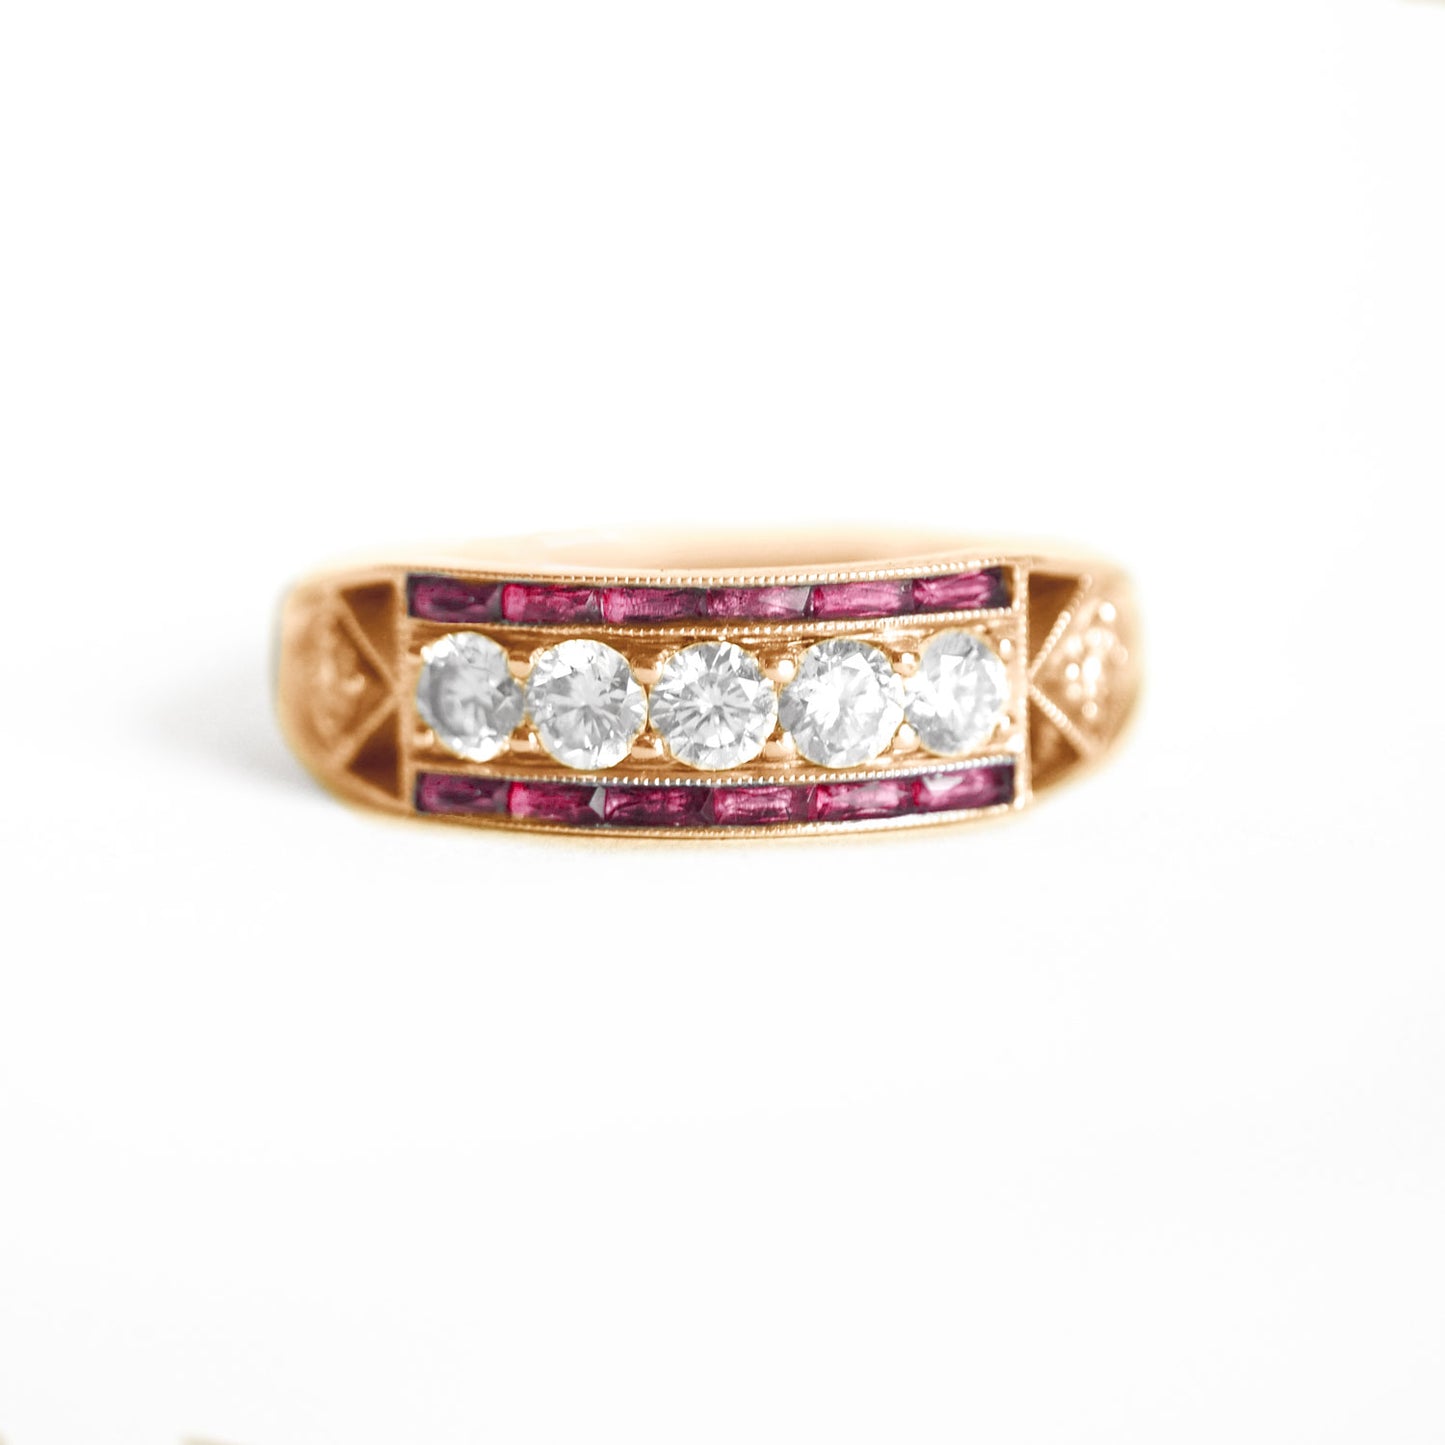 Art Deco Five Diamond Ring with French Cut Rubies